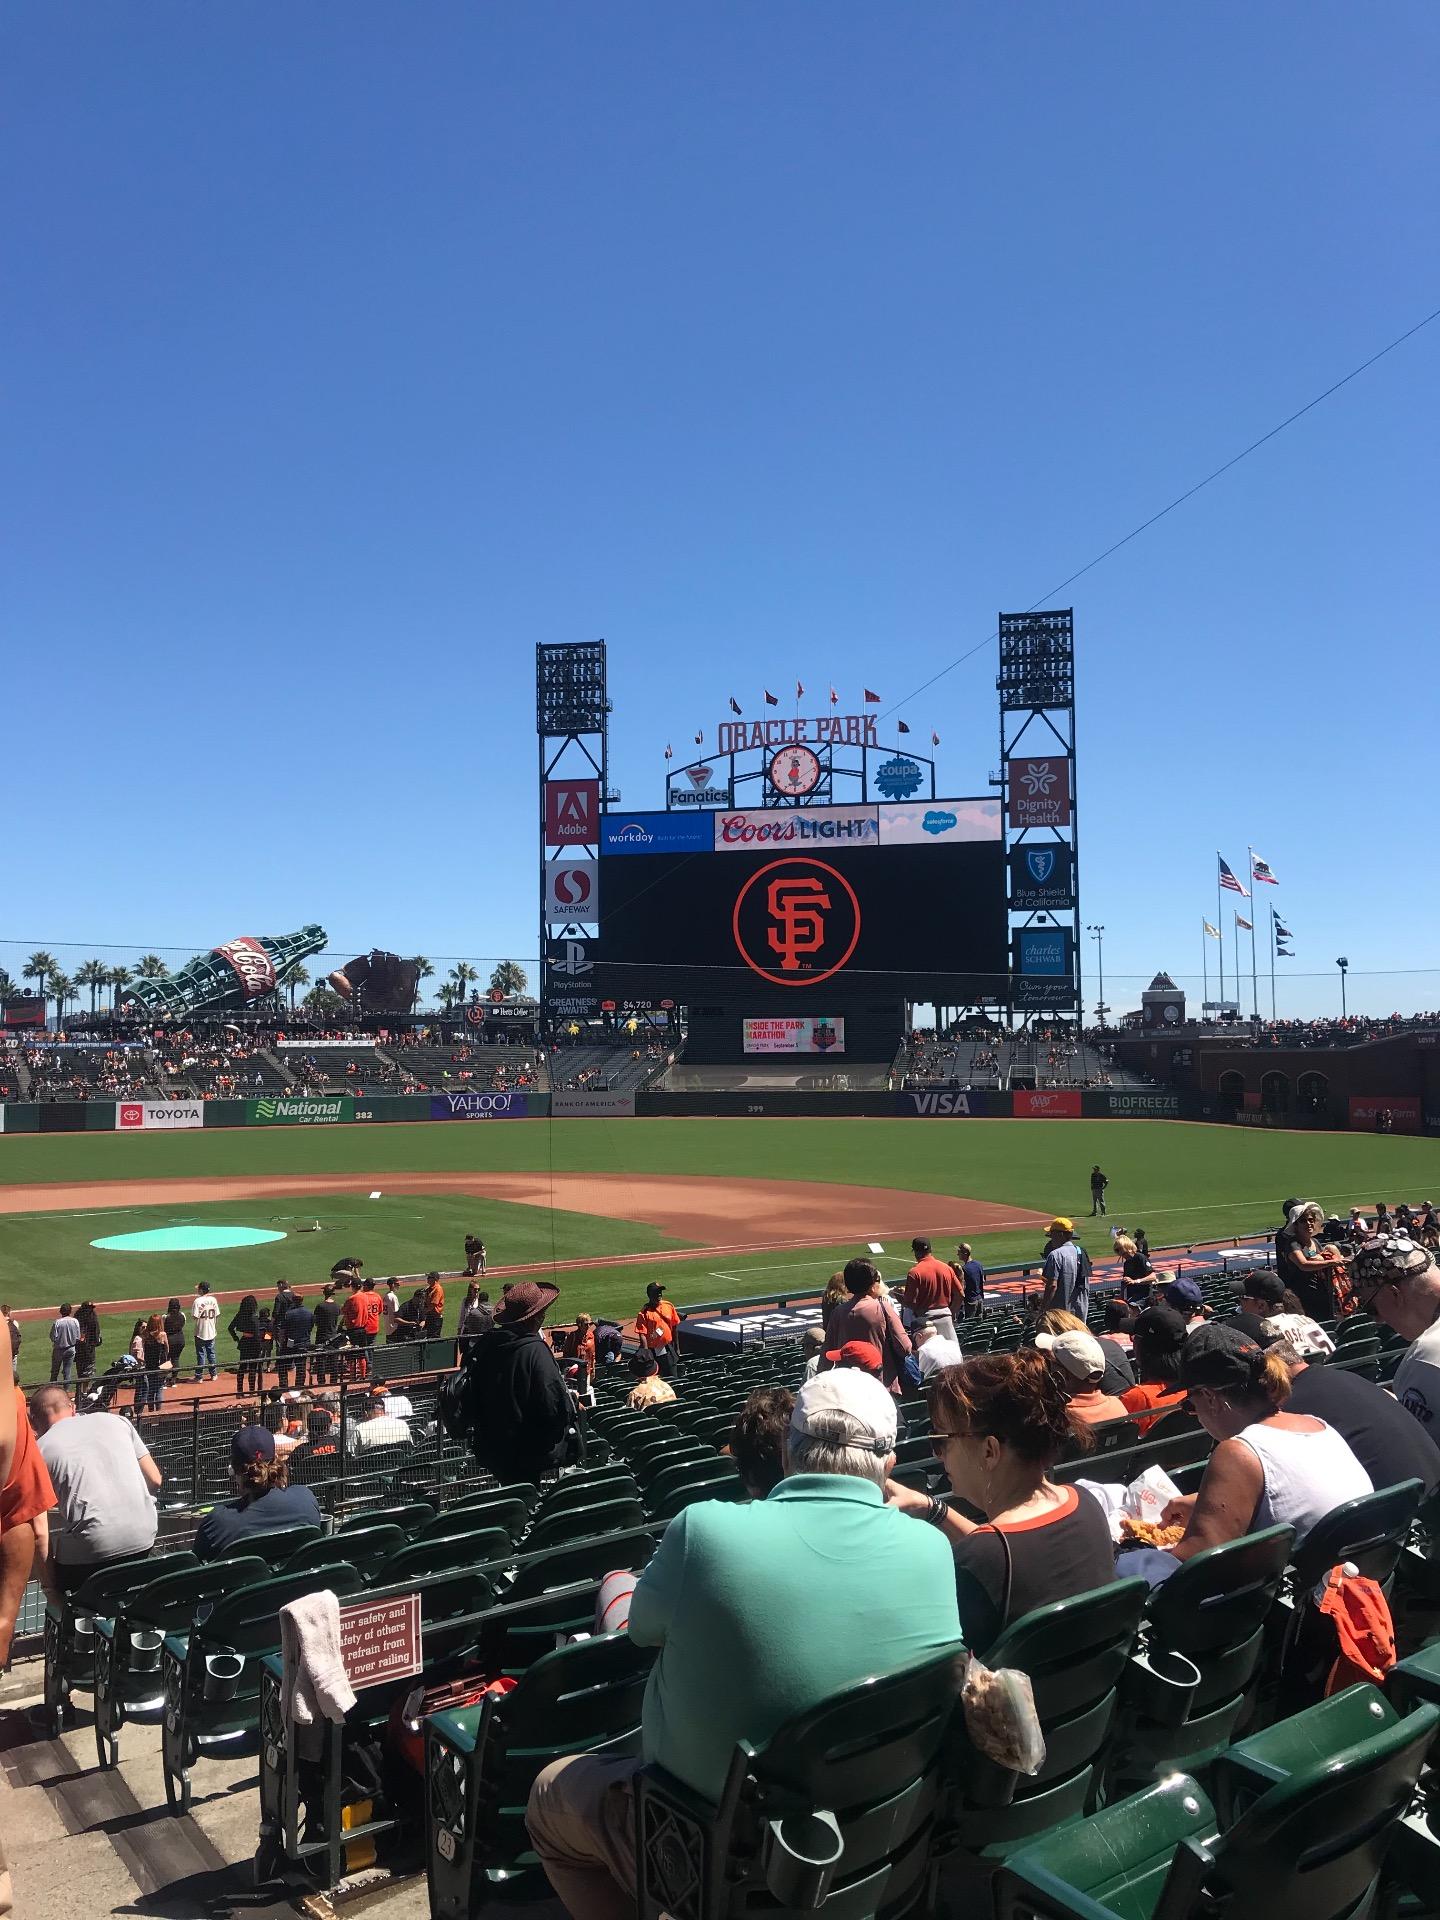 Oracle Park Section 112 Row 27 Seat 1 2 Francisco Giants Vs San Diego Padres Shared